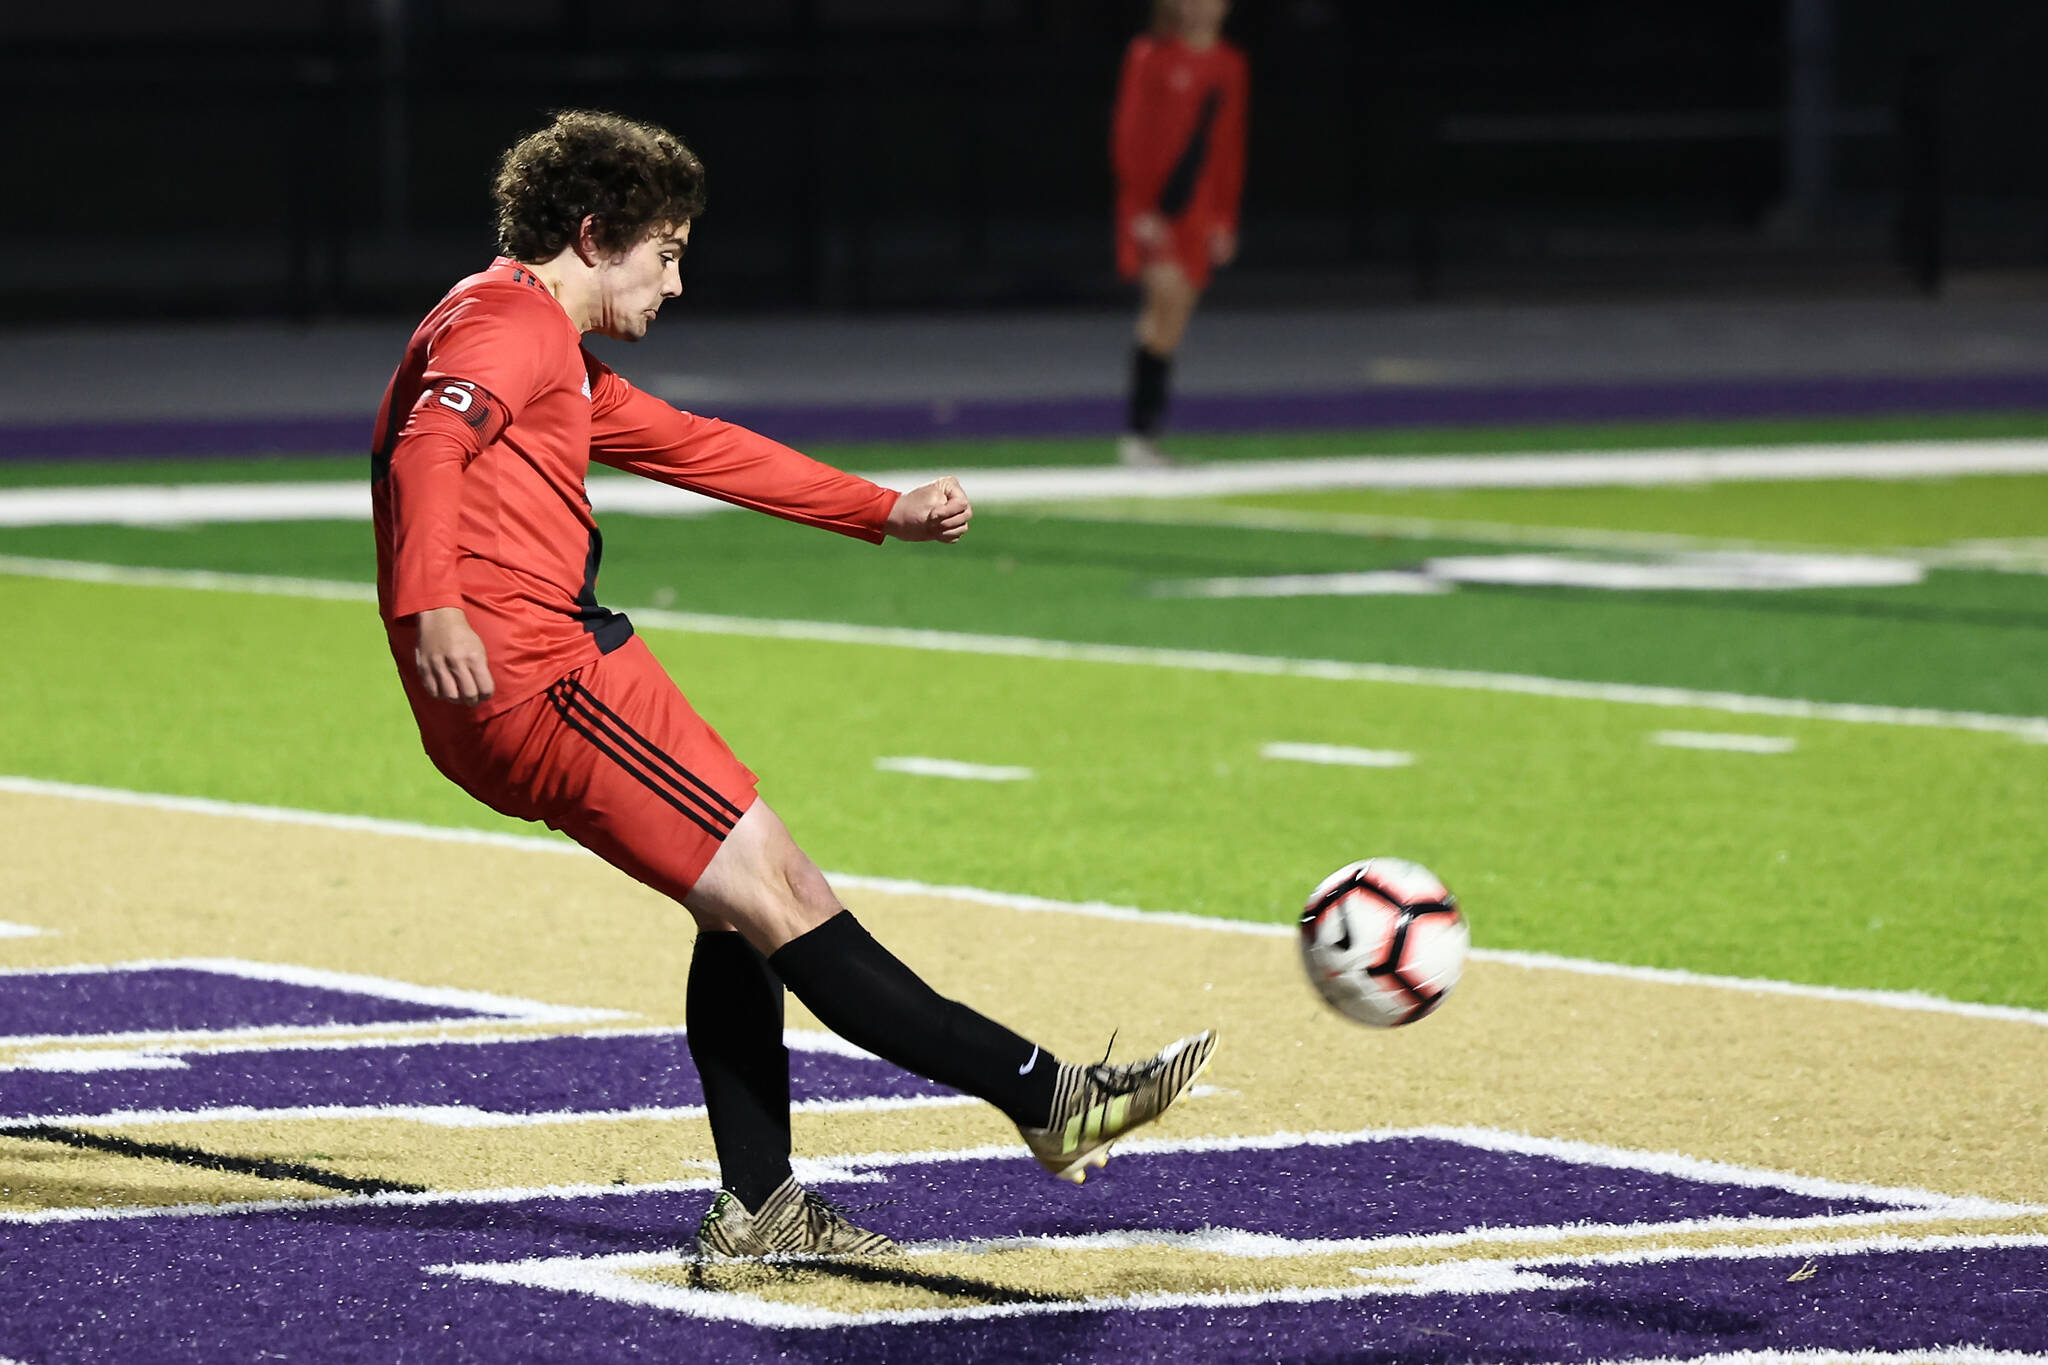 Photo by John Fisken
Grant Steller aims a kick in the Coupeville boys soccer team’s final game of the season. The Wolves were defeated 2-0 in a playoff game against Summit Atlas Nov. 1 at the Wildcat Memorial Stadium in Oak Harbor, bumping them from the tournament.